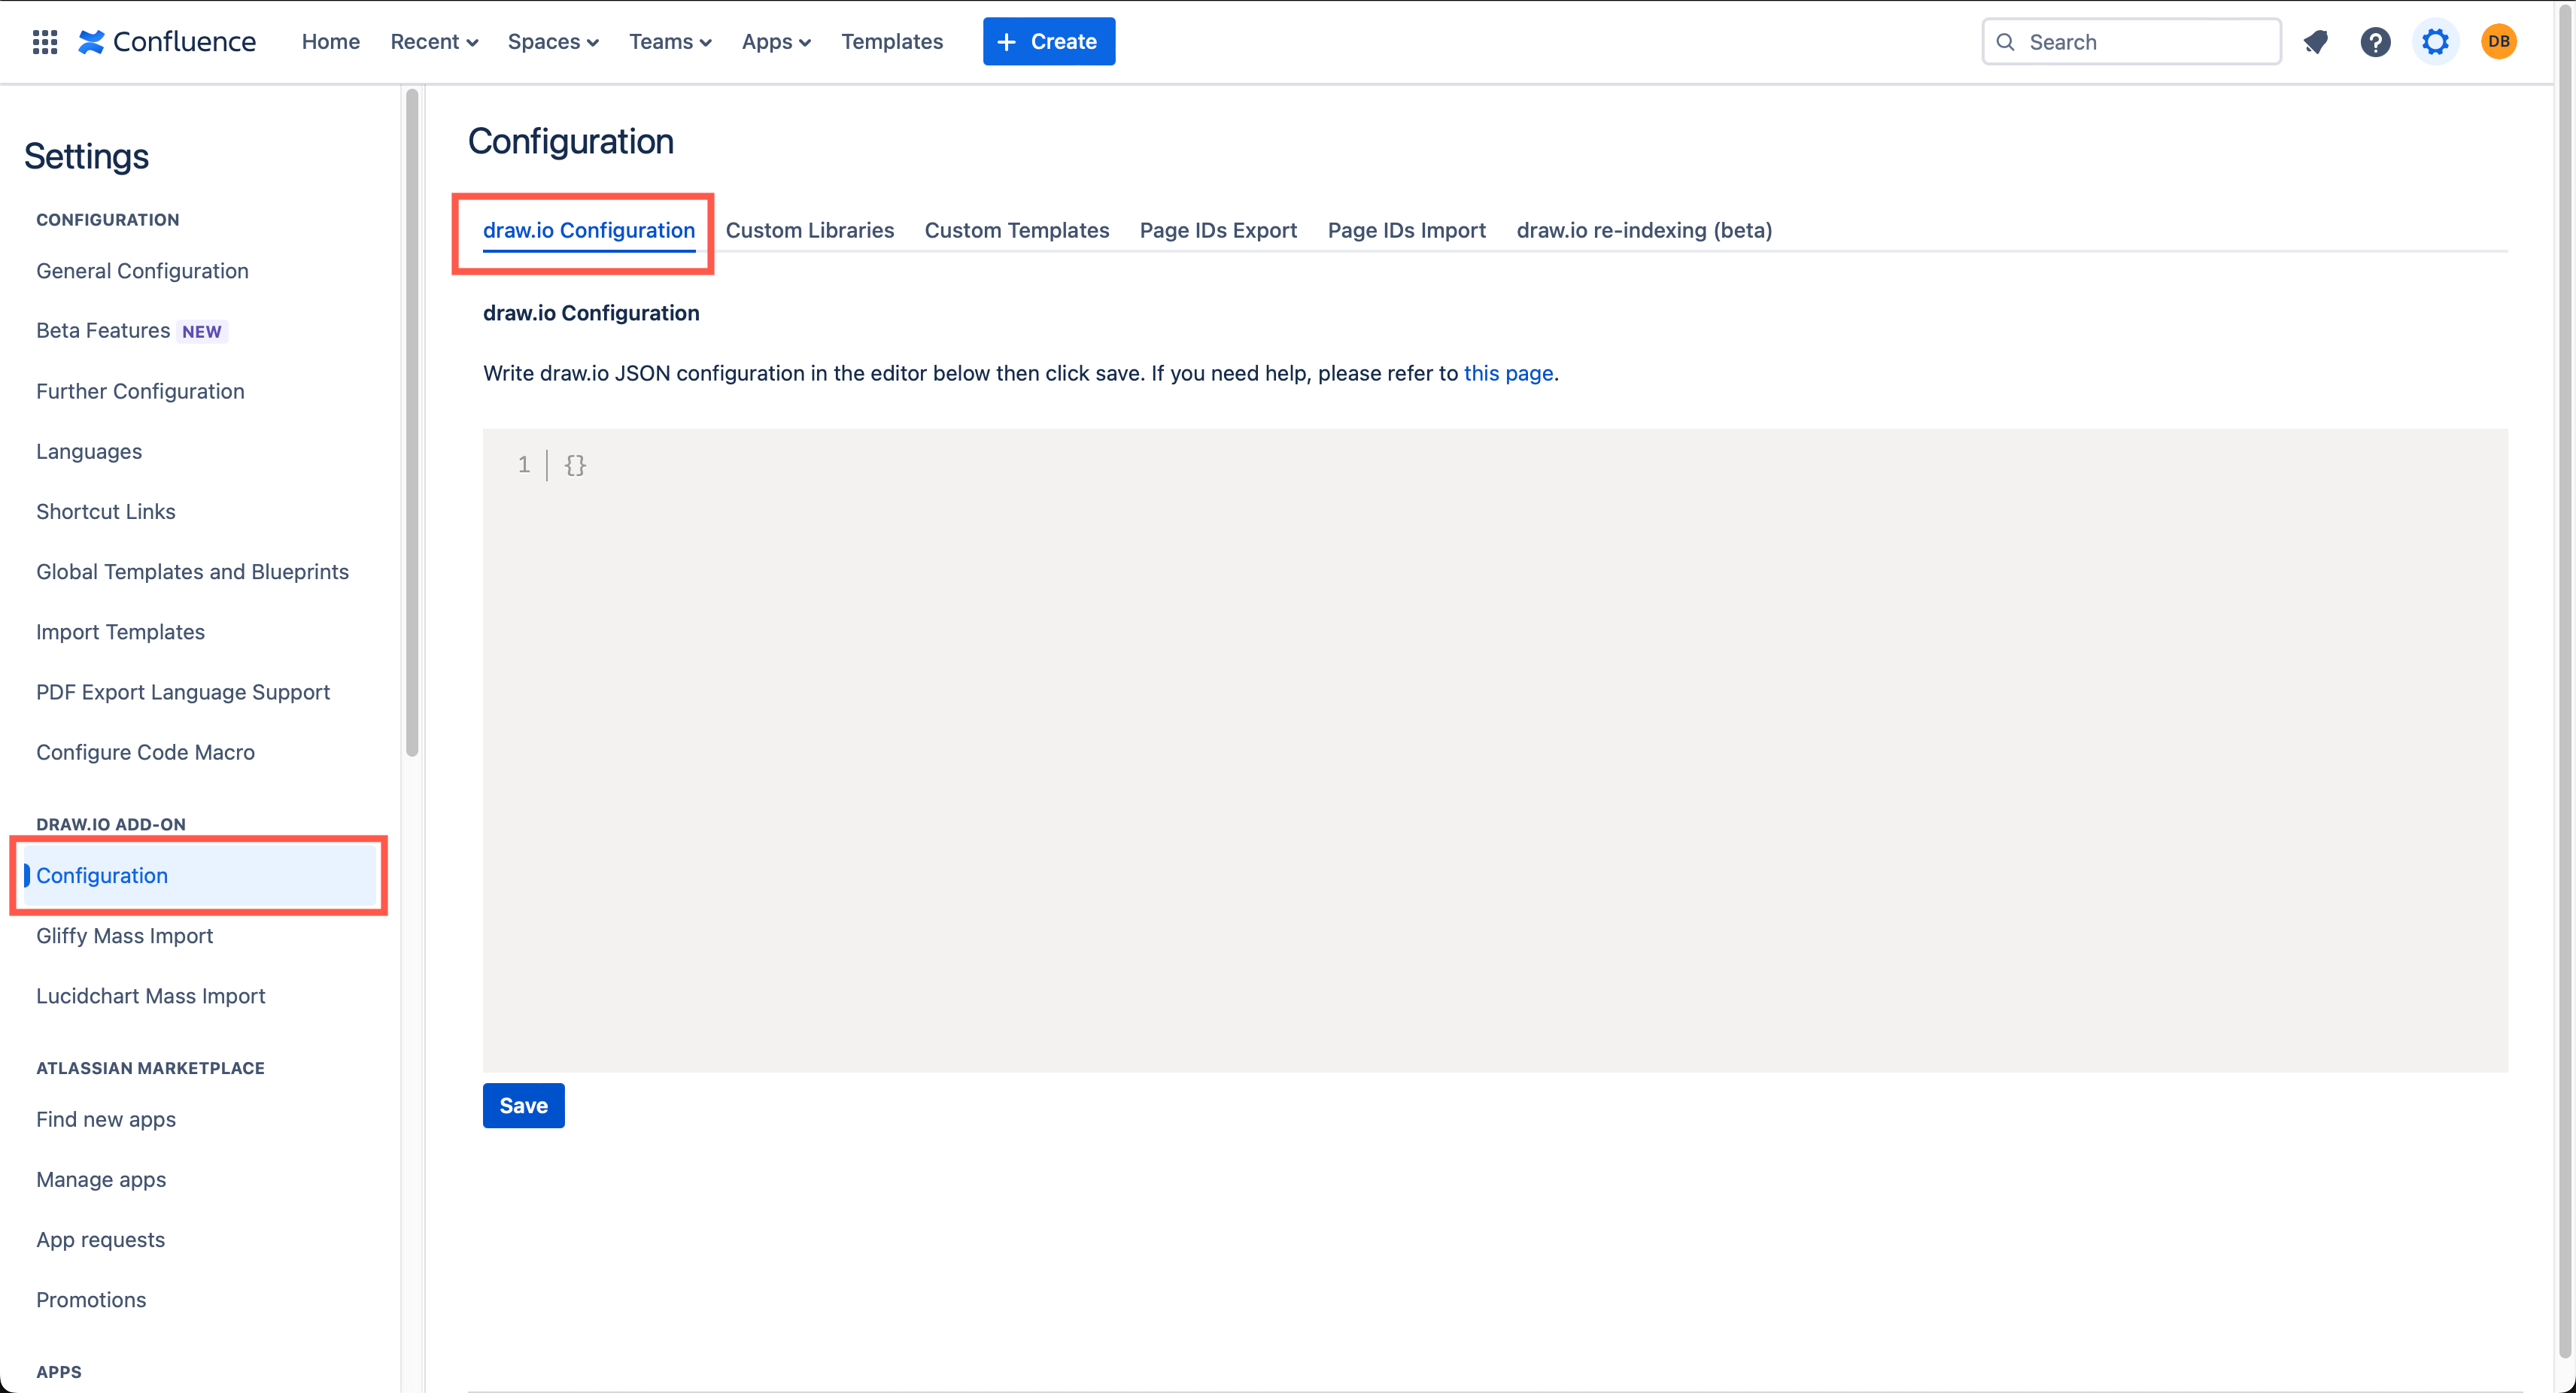 draw.io Configuration in Confluence Cloud